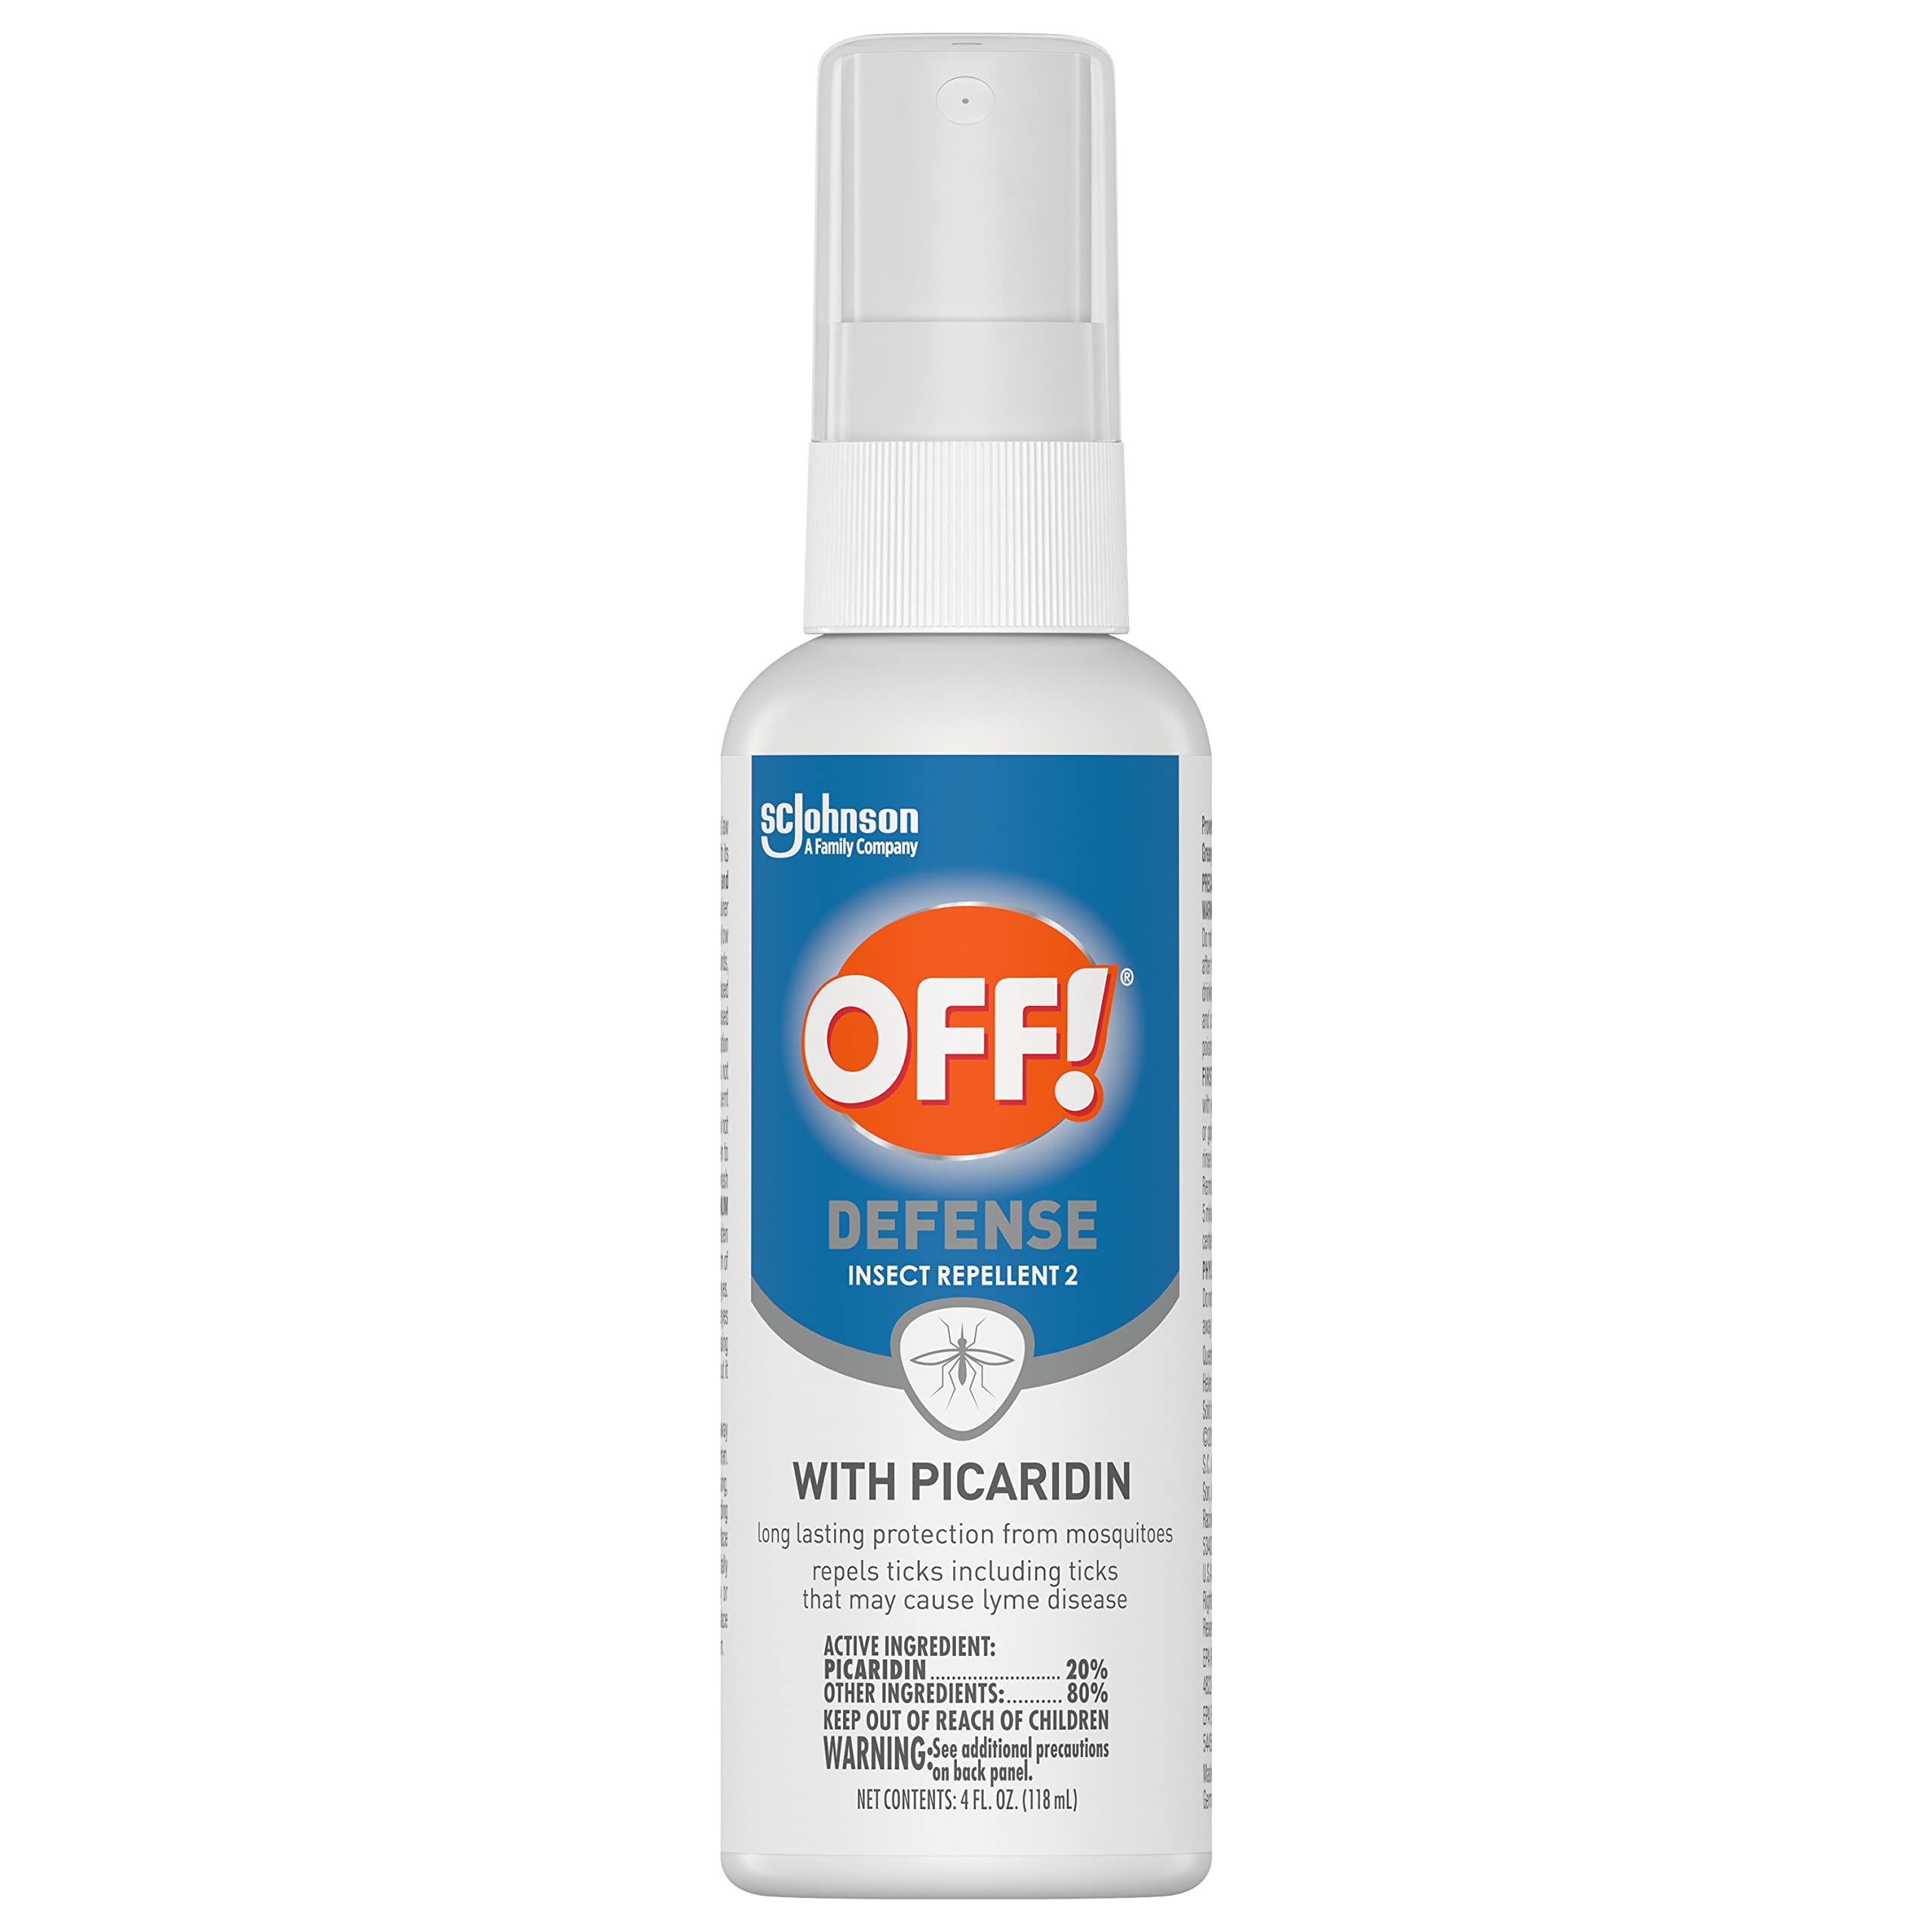 4-Oz. OFF! Defense Insect Repellent Spritz w/ Picaridin $3.80 + Free Shipping w/ Prime or on $35+